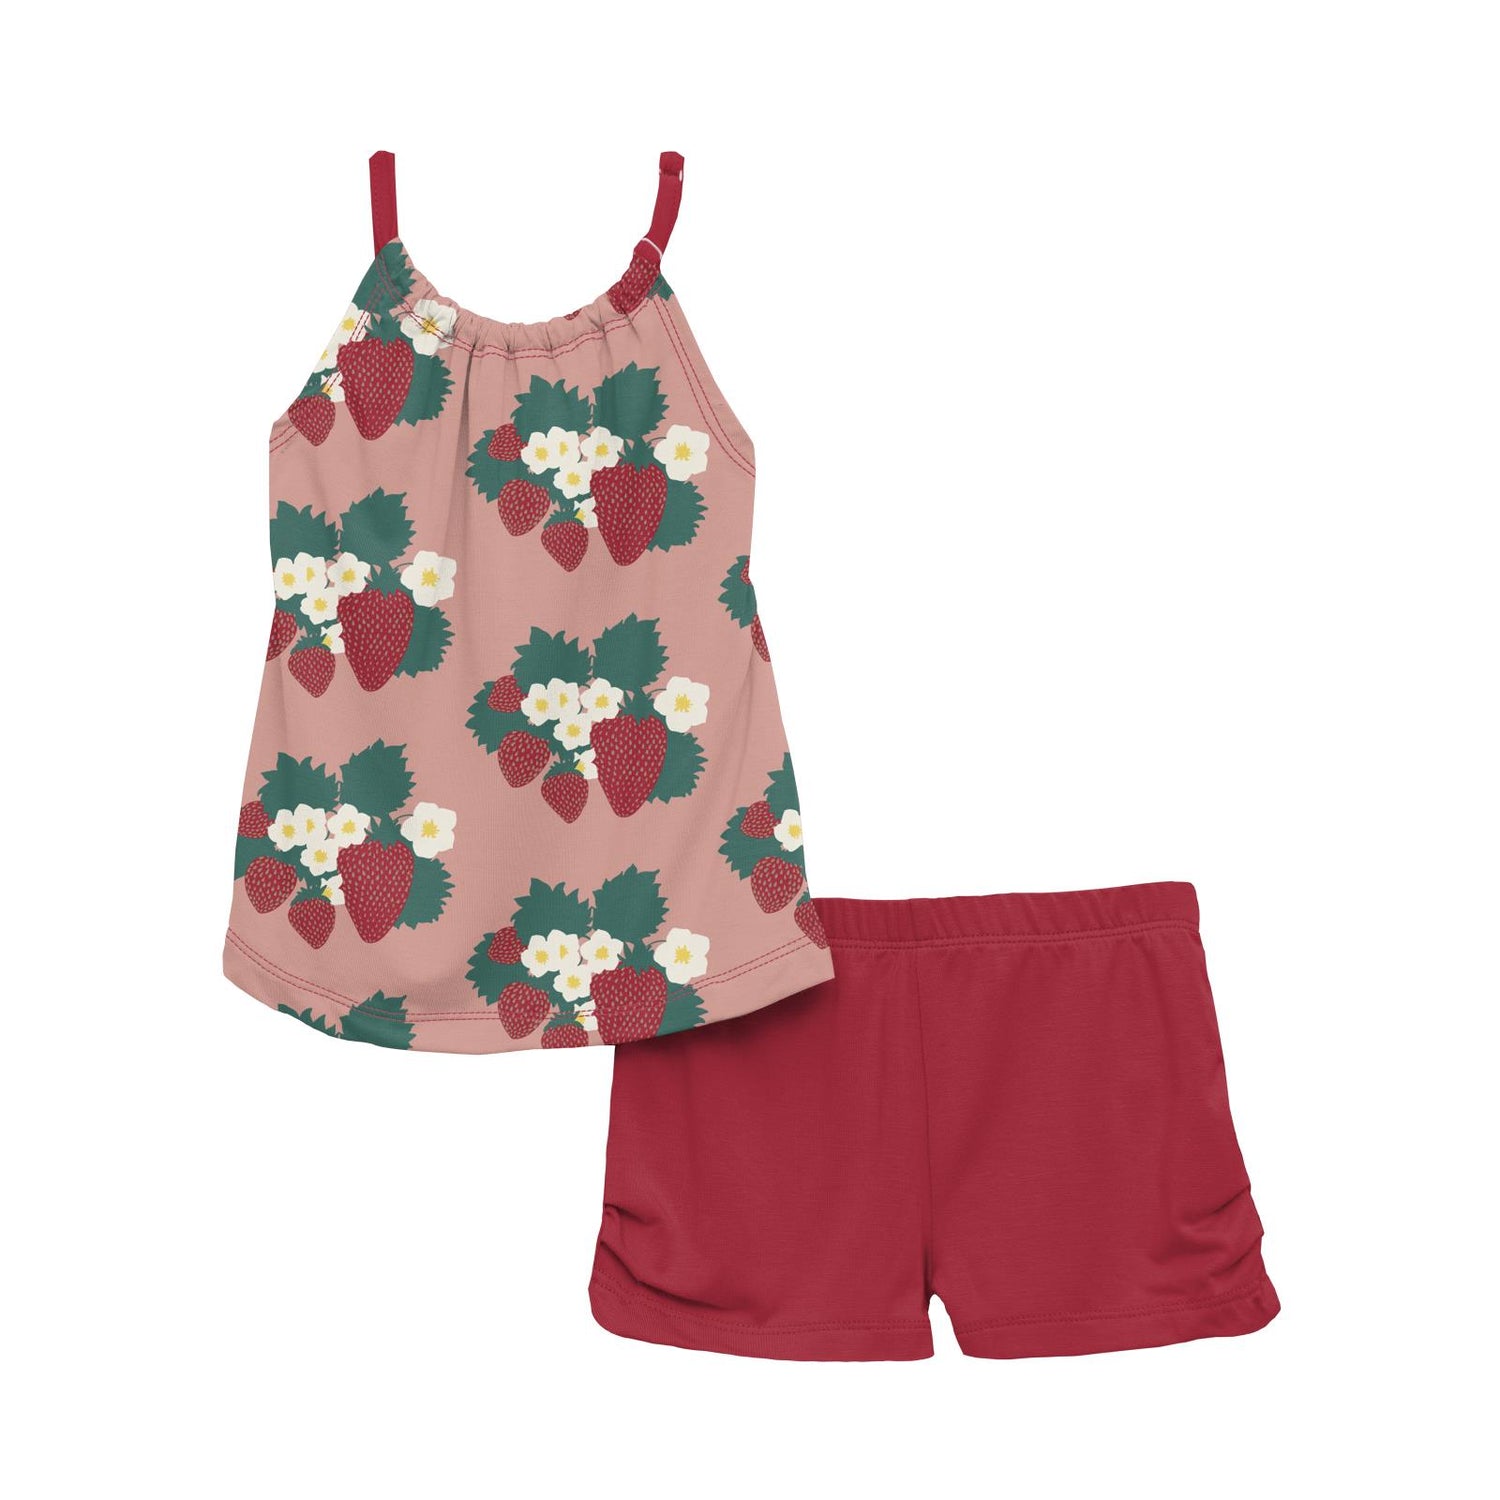 Print Gathered Cami & Shorts Outfit Set in Blush Strawberry Farm